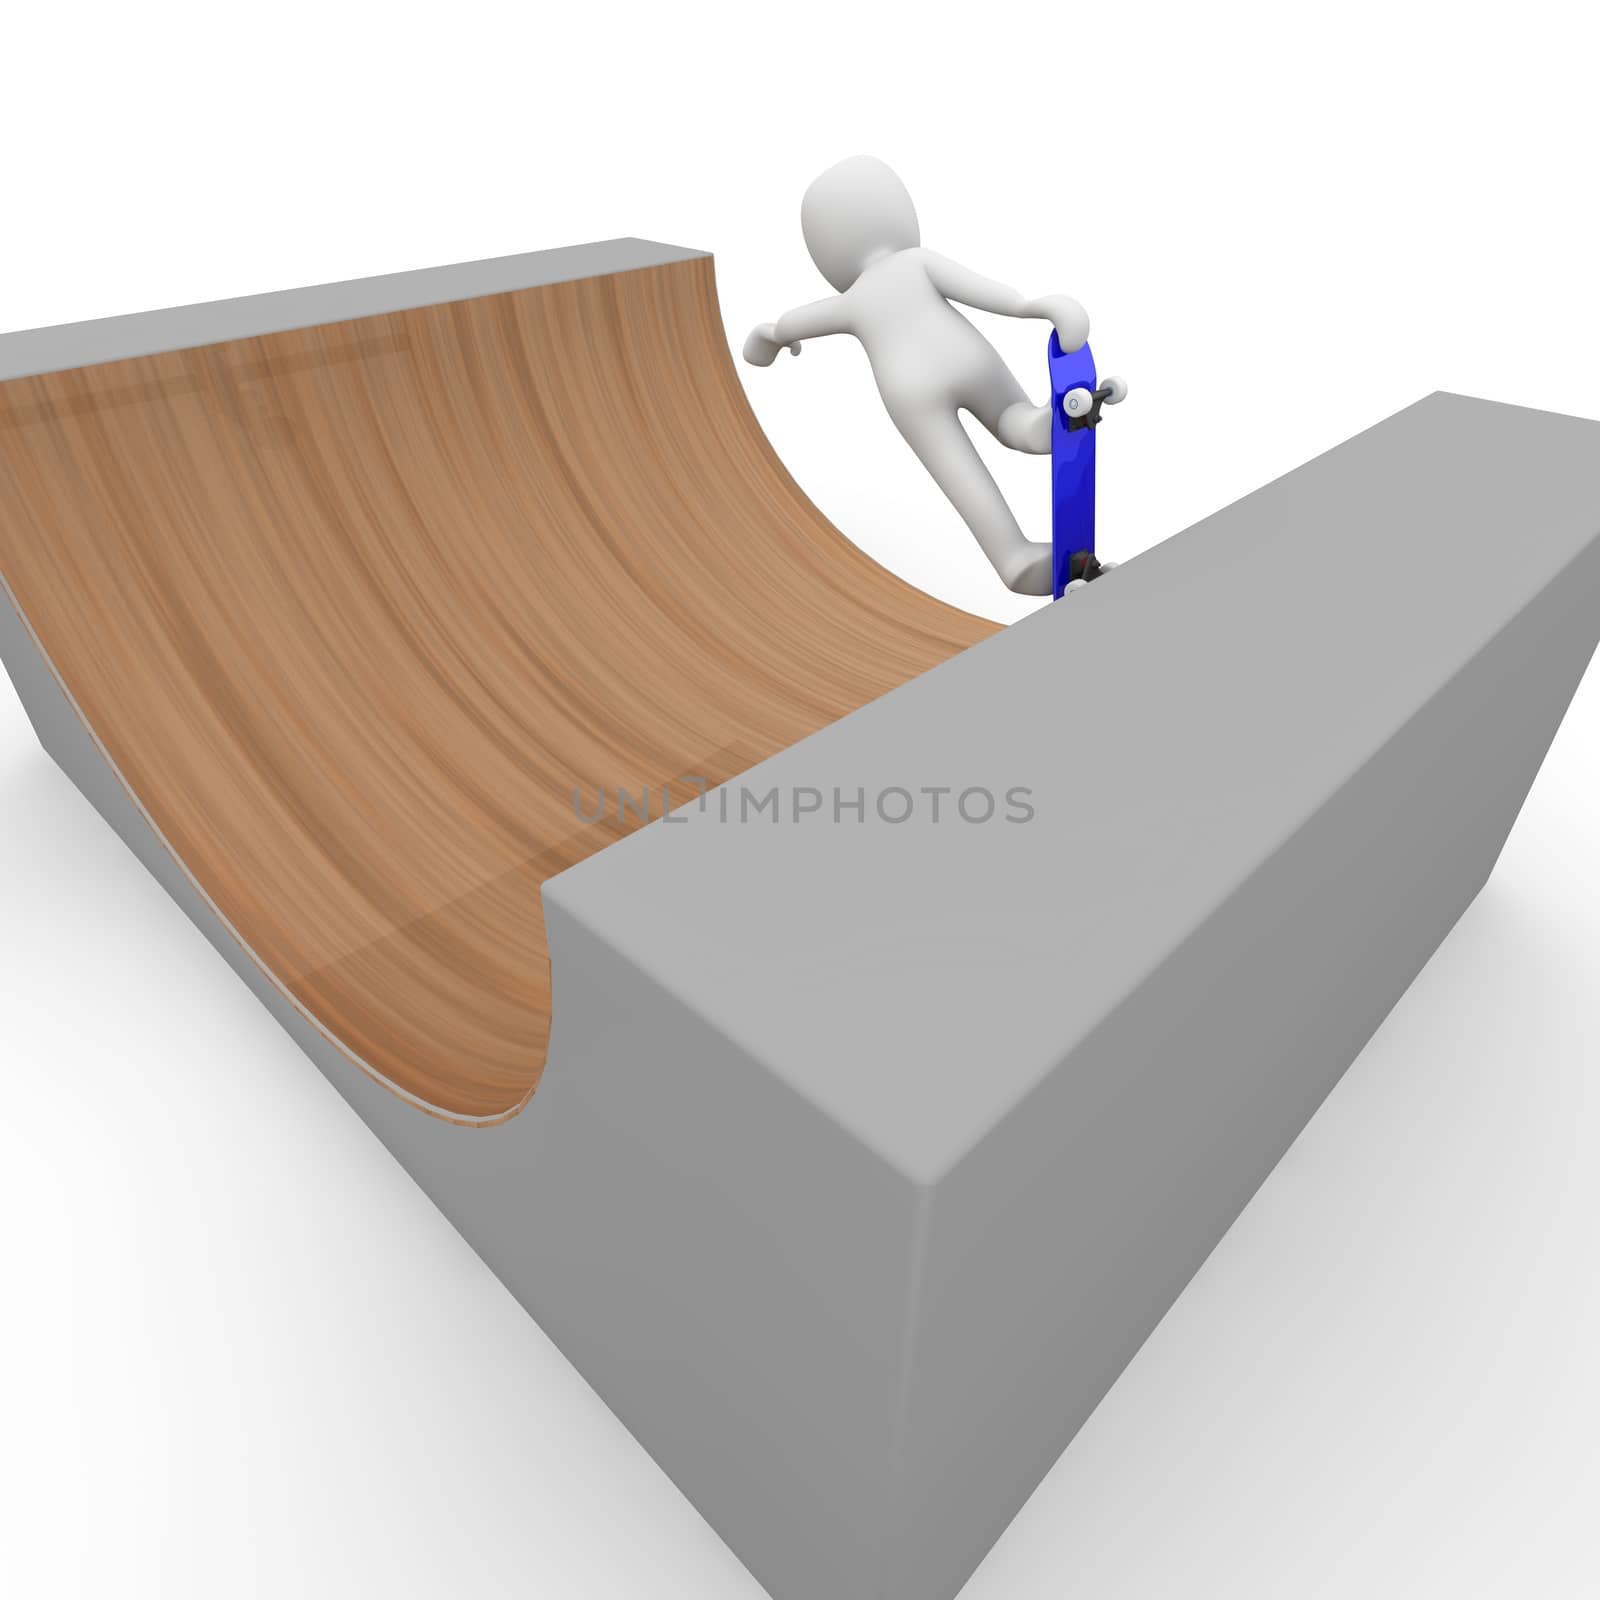 halfpipe with a Skateboarder.